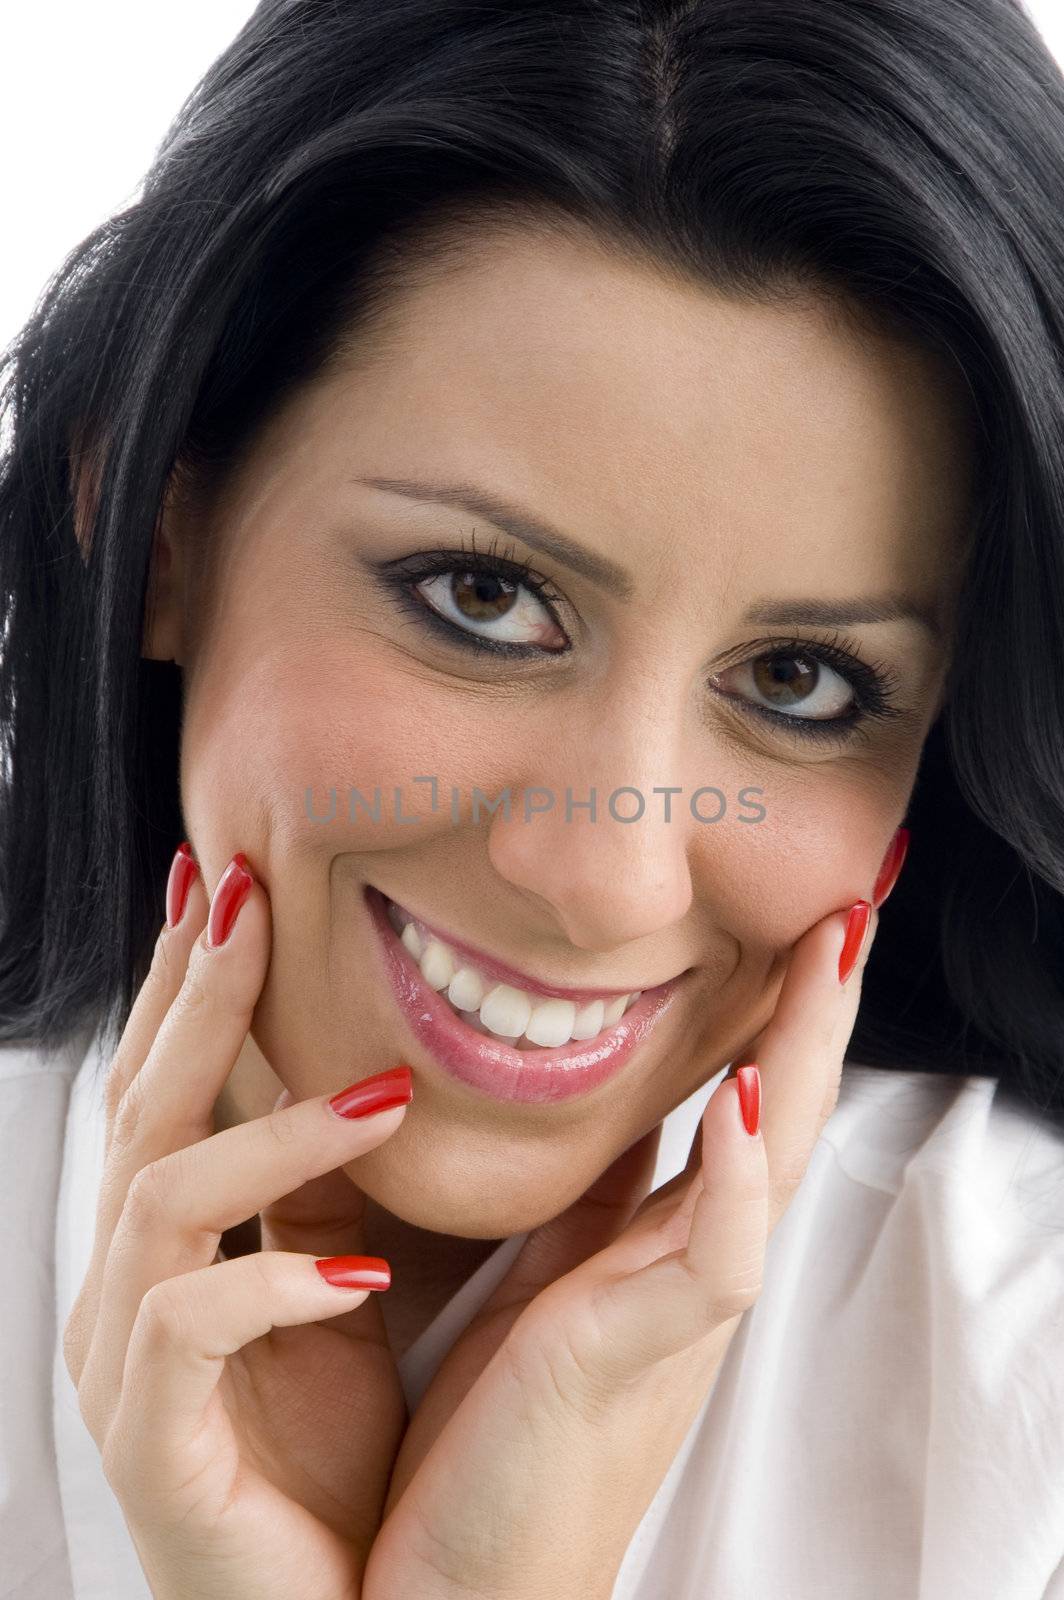 woman looking at camera on an isolated background